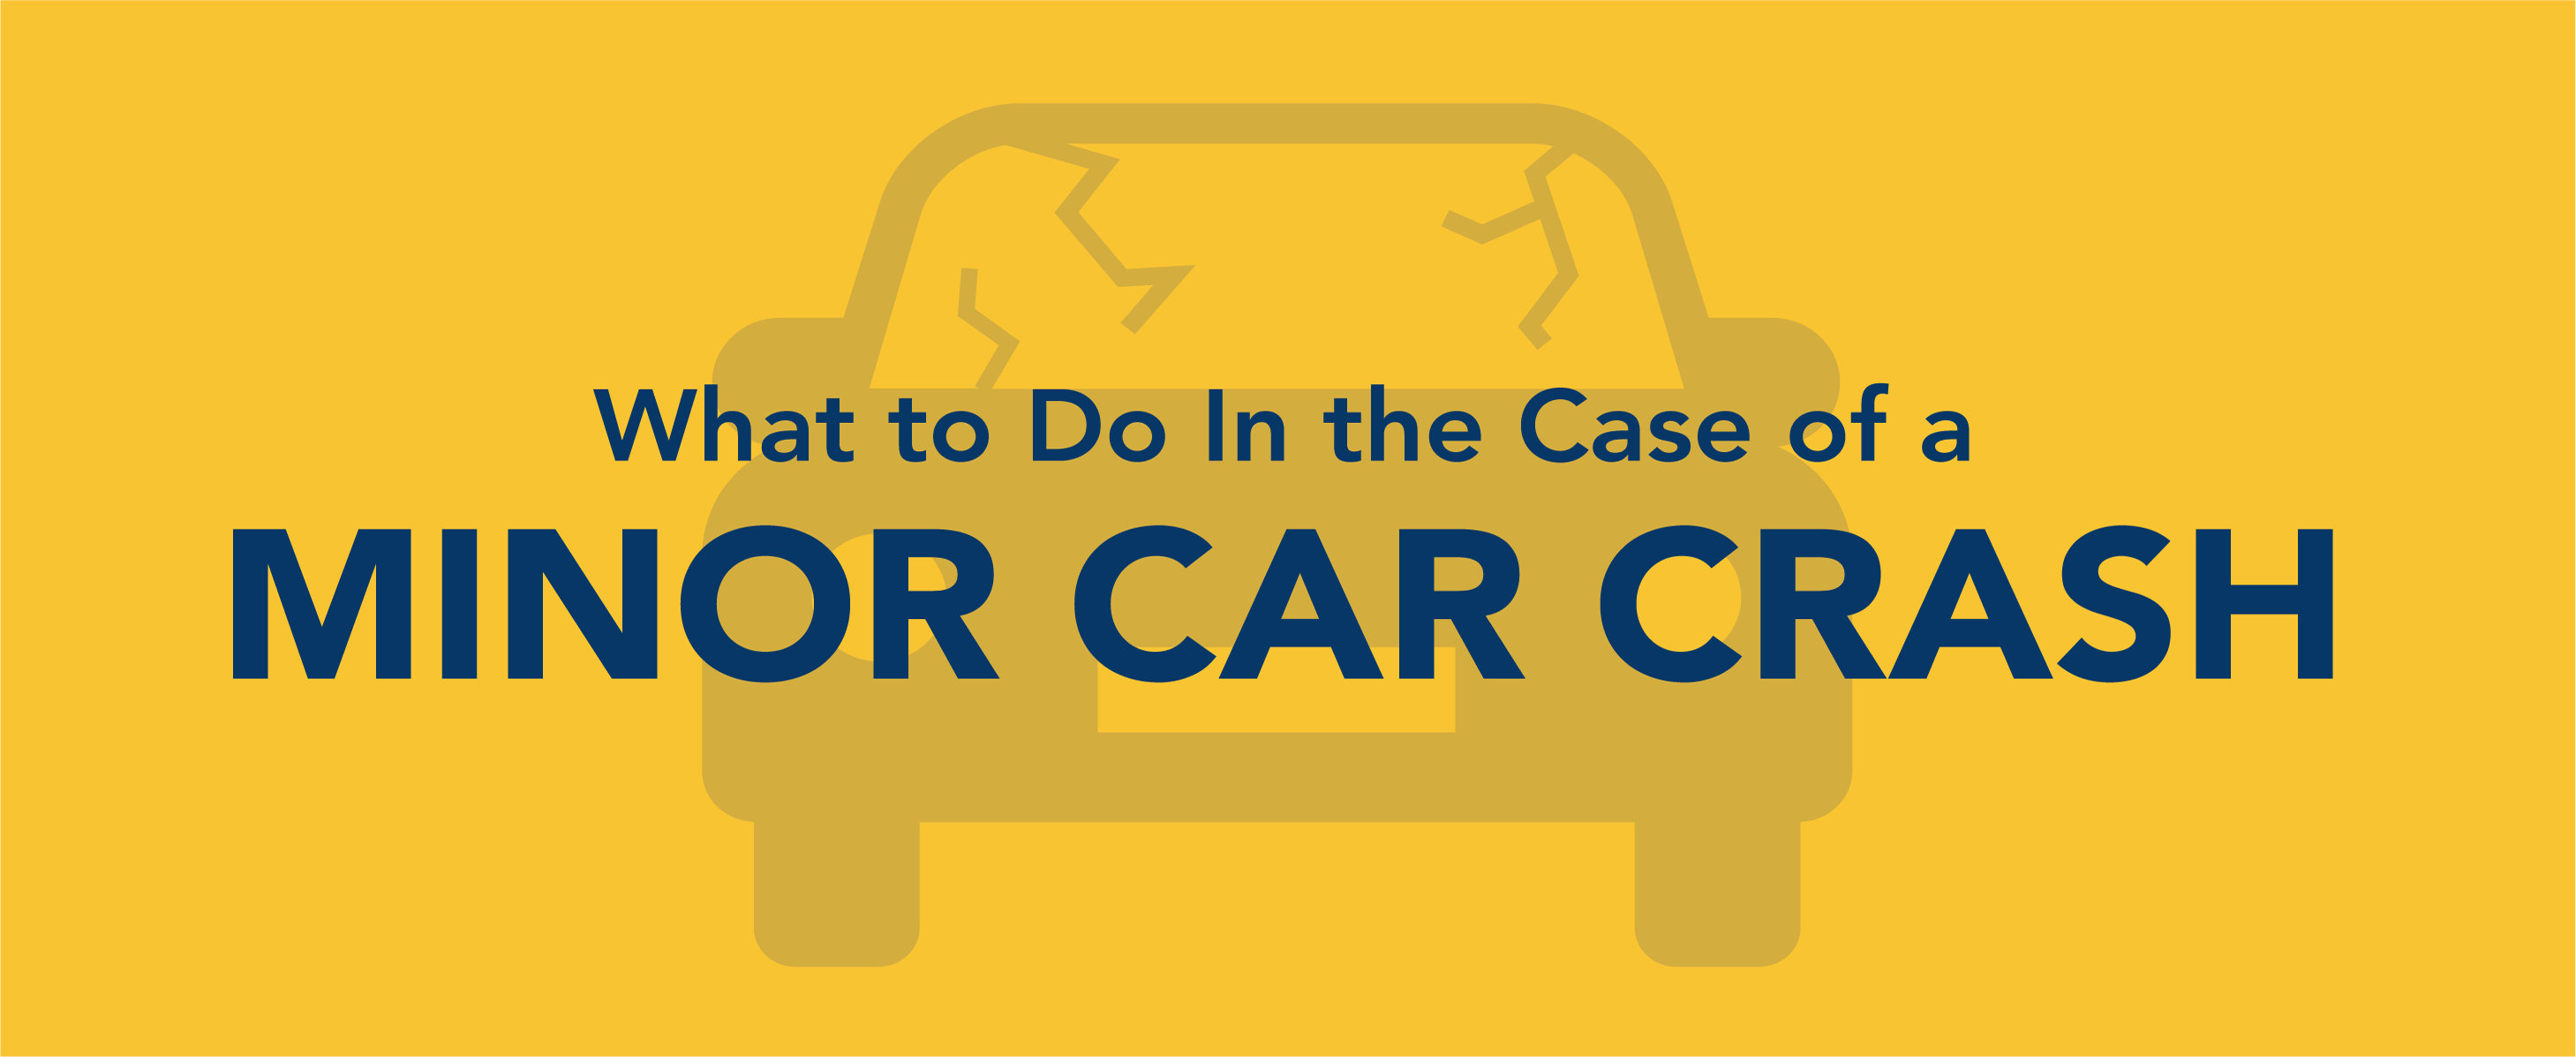 What to do in the case of a minor car crash.